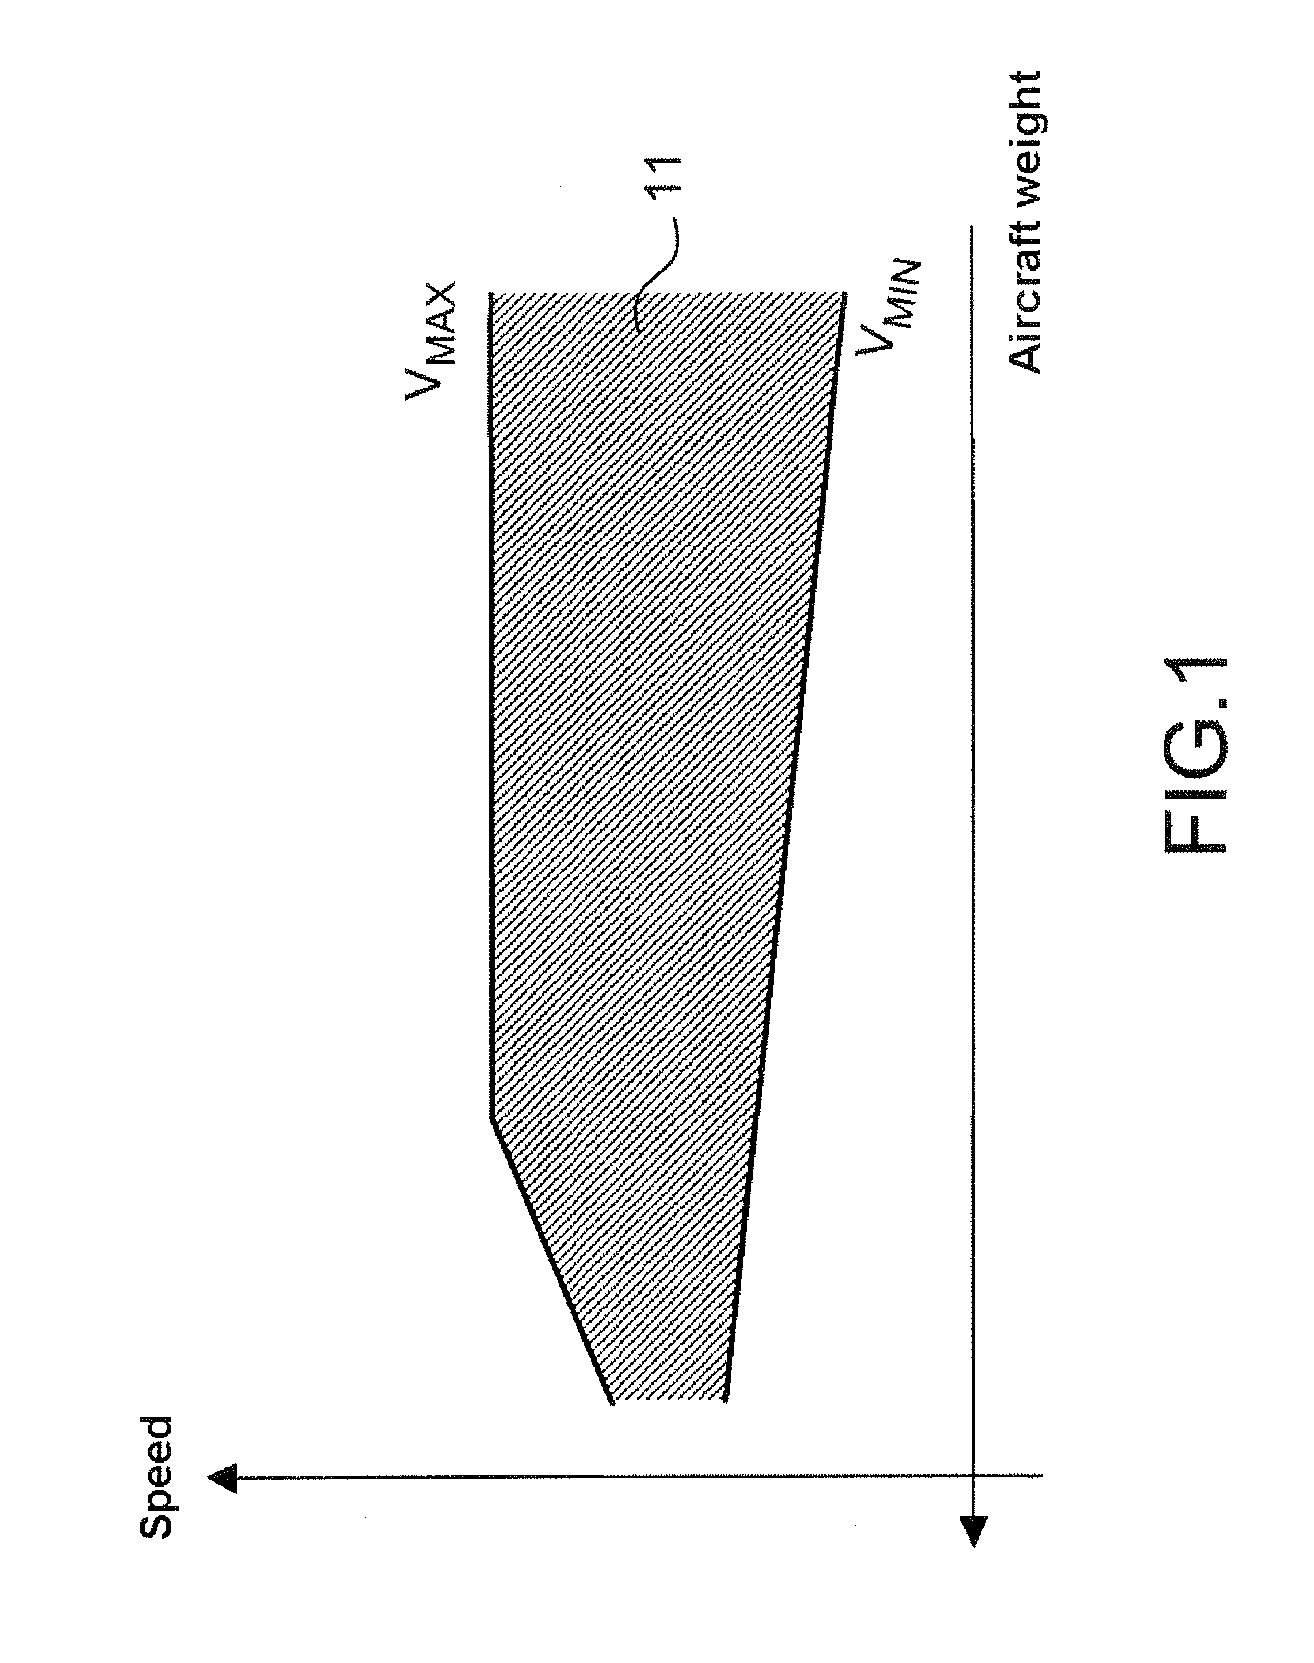 Method for Determining the Speed of an Aircraft